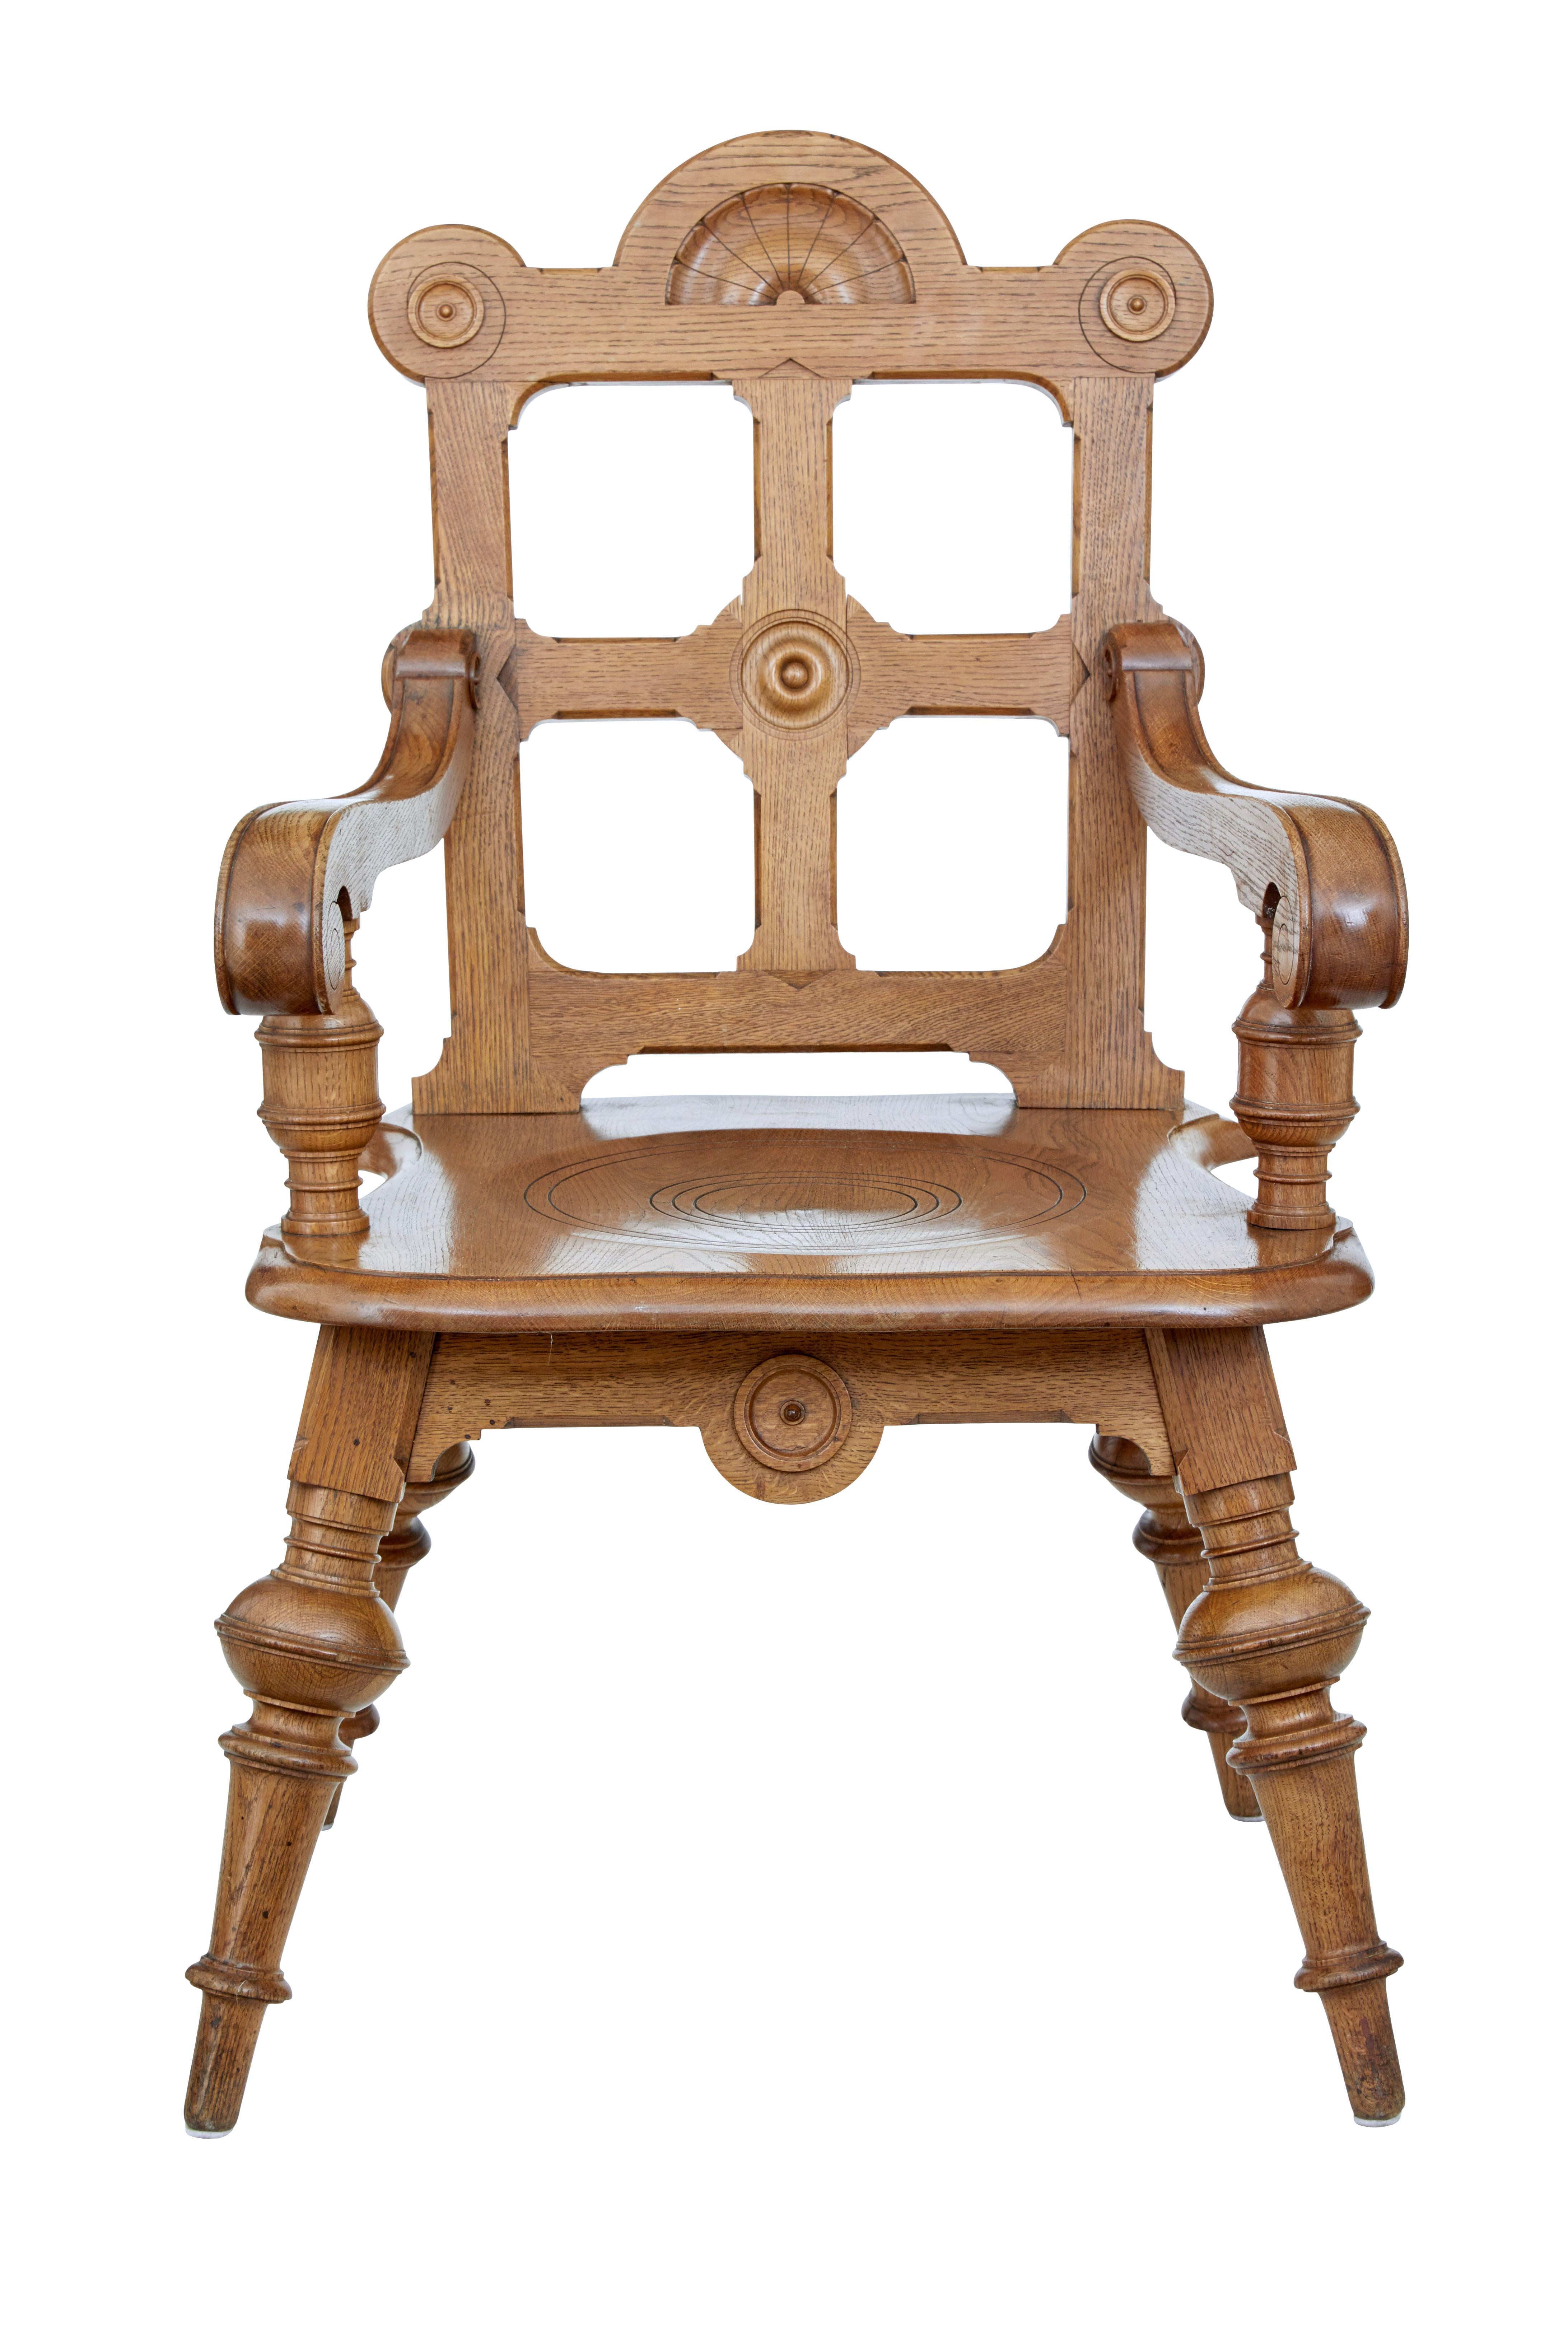 Late 19th century carved oak Arts & Crafts armchair, circa 1890.

Shaped back rest with carved roundels and a central sunburst, link to the scrolled arms and turned supporting column. Seat with circular pattern.

Standing on 4 turned legs. Good